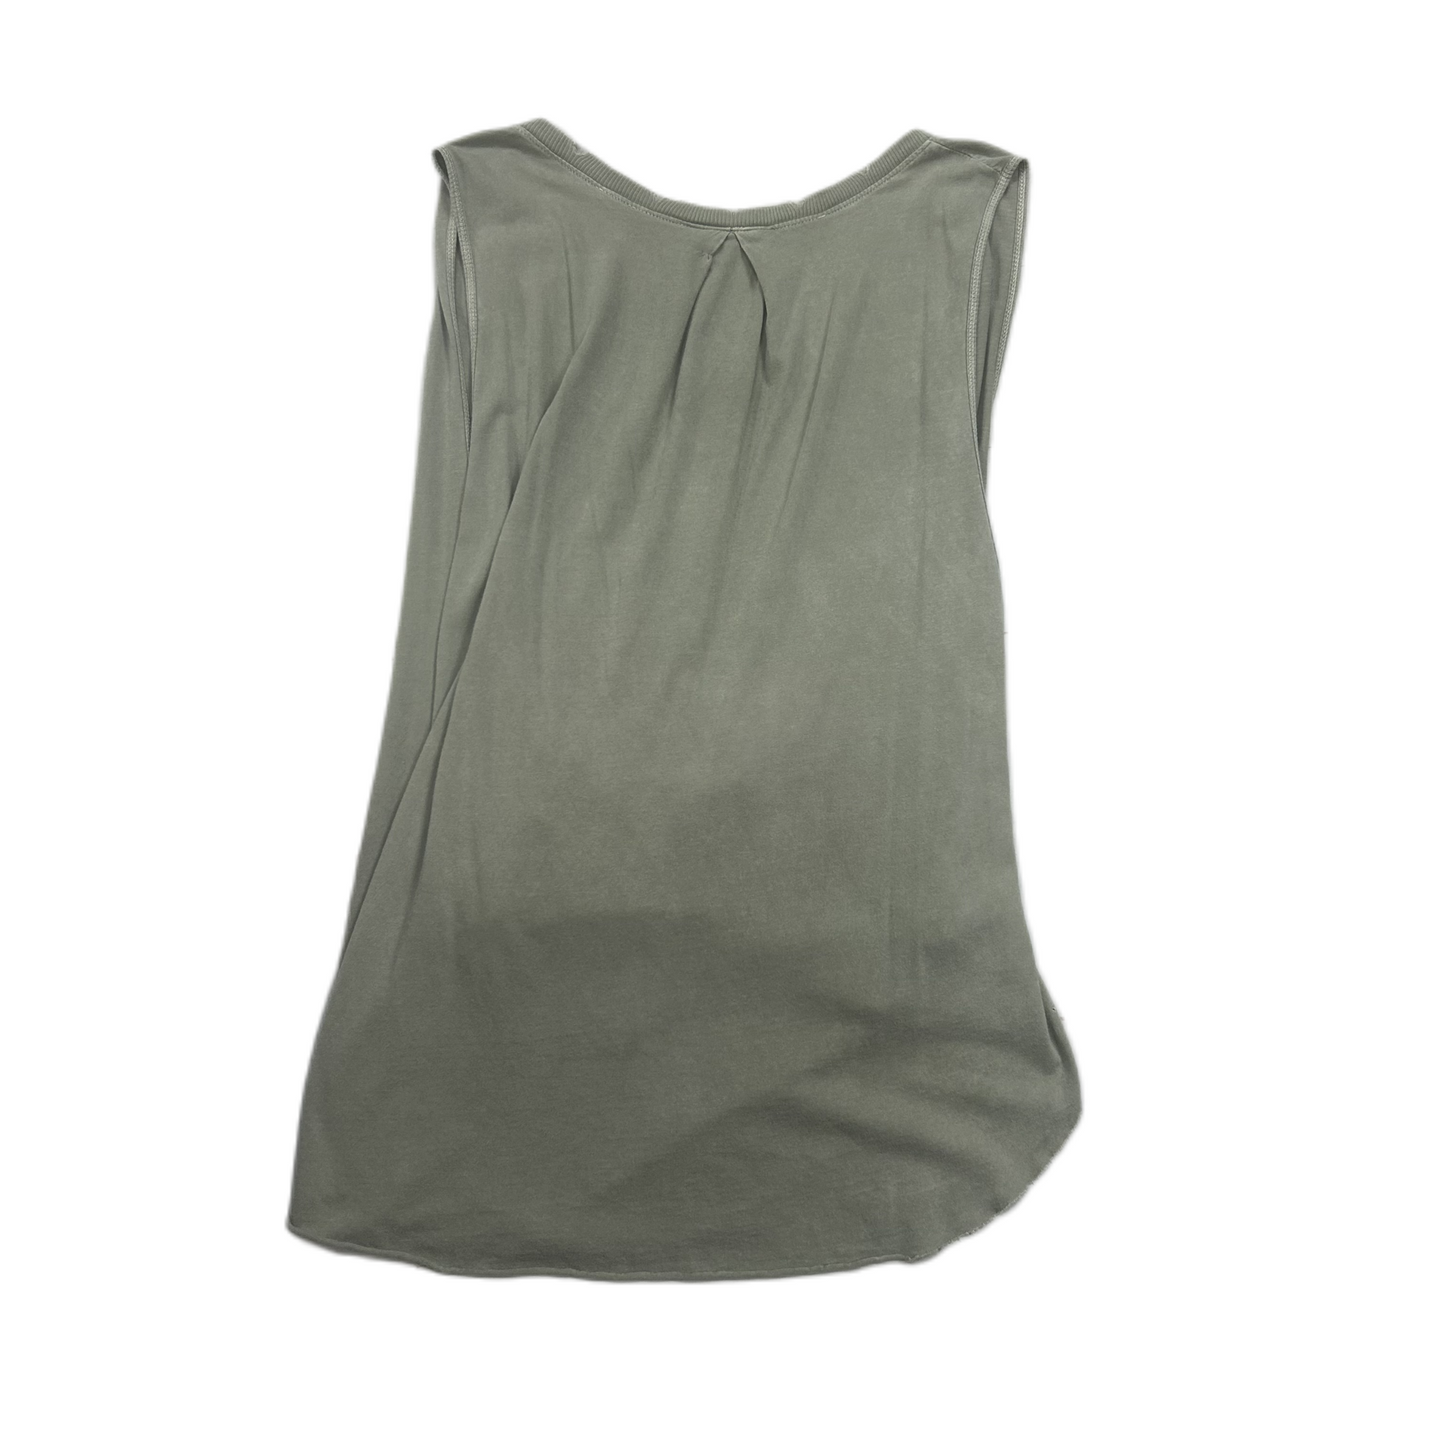 Green Top Sleeveless By We The Free, Size: M